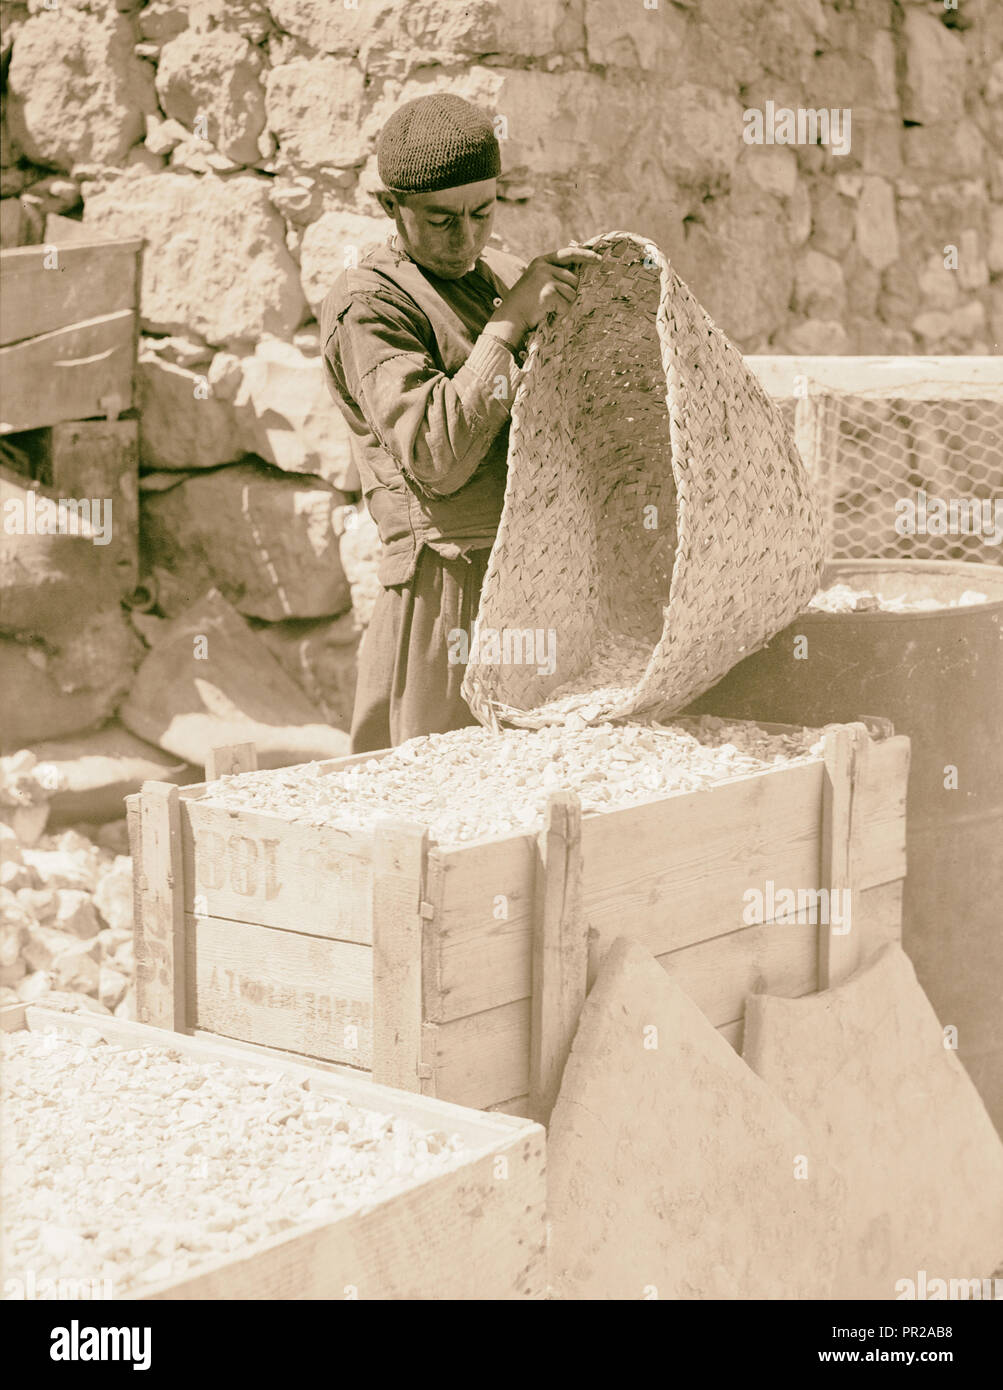 Ground flint. Photograph shows a man emptying a basket of gound flint into a wooden box. 1934, Middle East, Israel Stock Photo